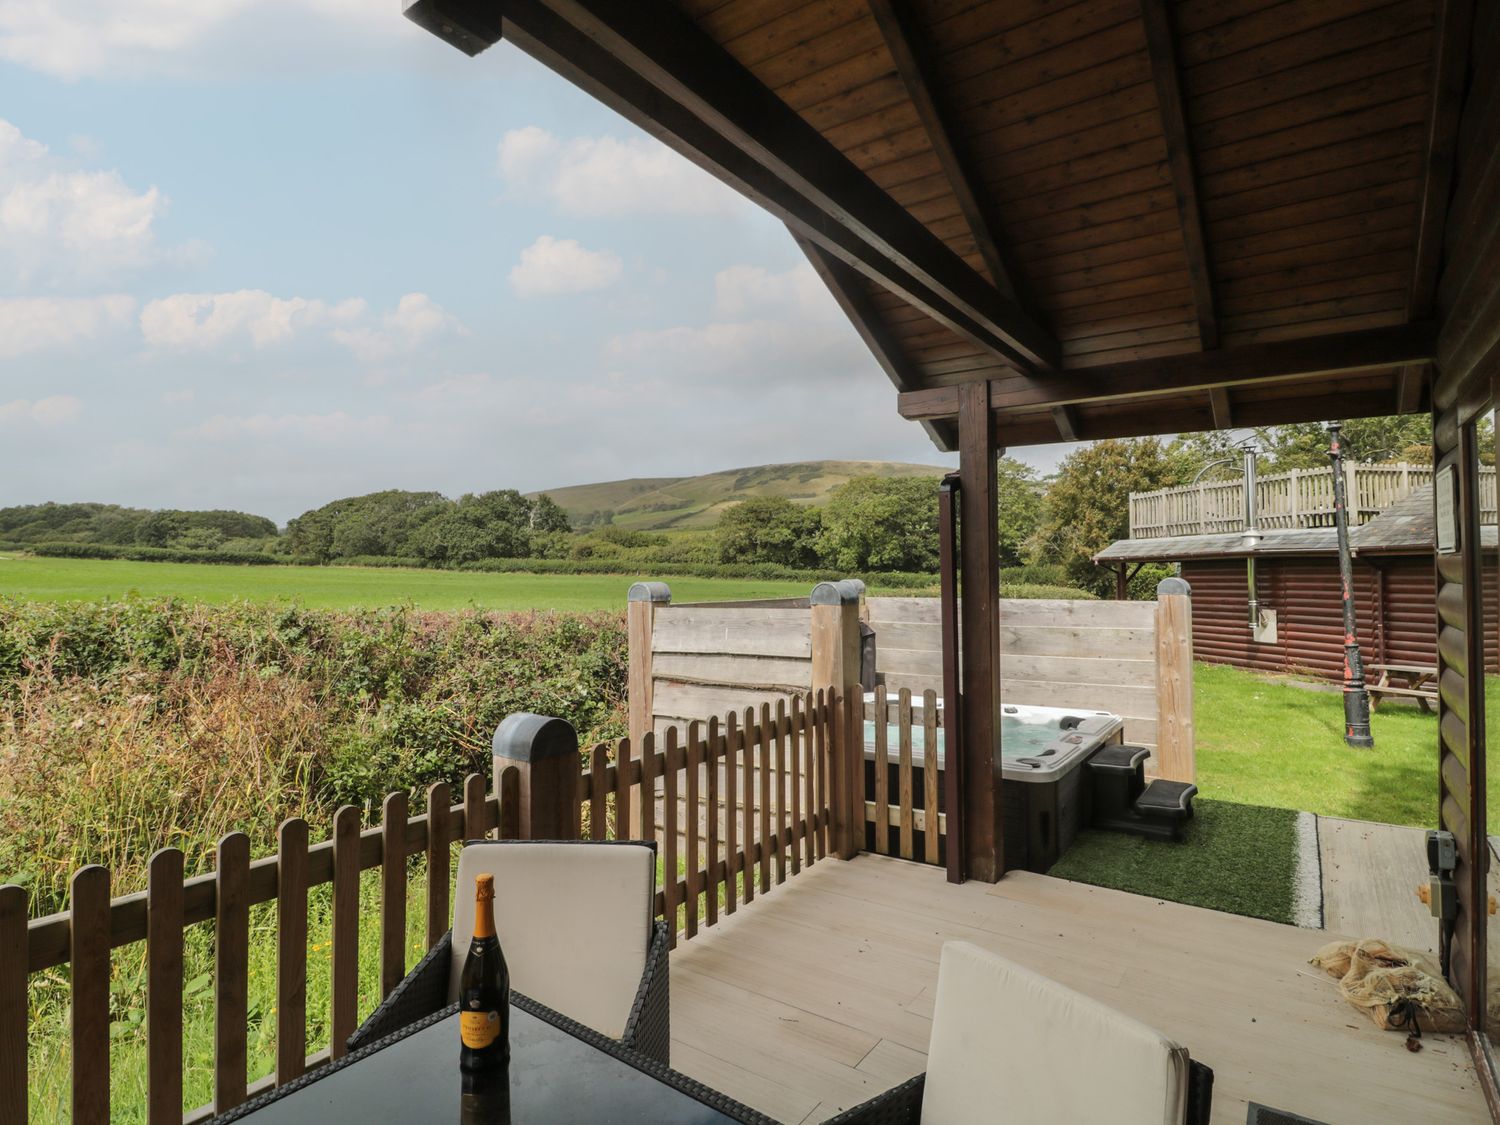 Oaks, Swanage, Dorset, In the Dorset Area of Outstanding Natural Beauty, Open plan, Hot tub, 3 beds.